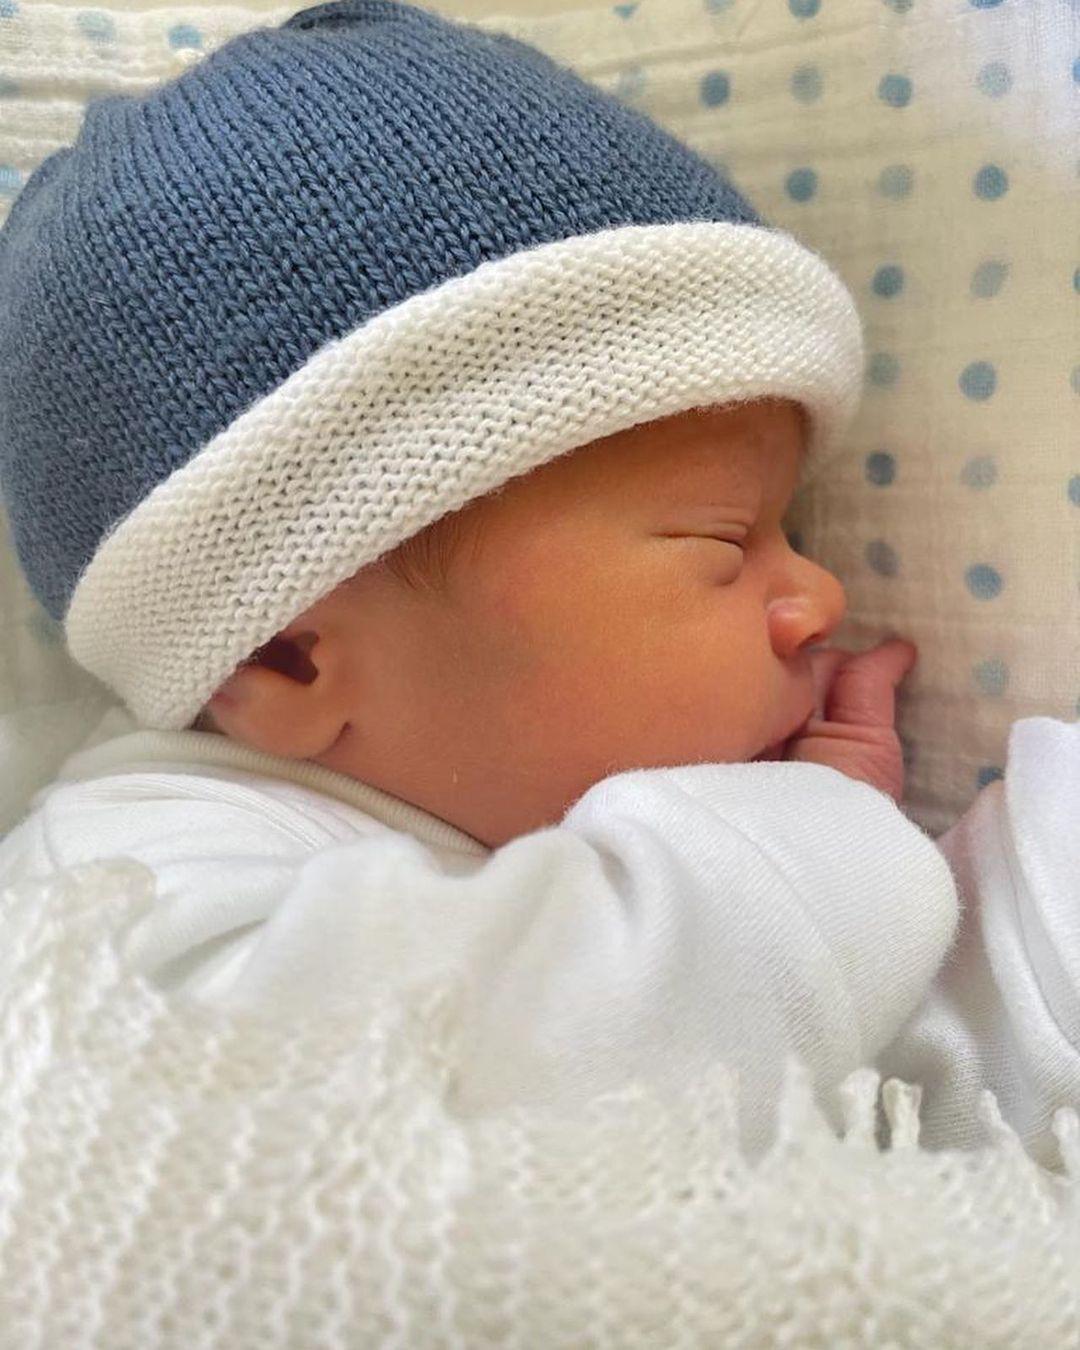 Princess Eugenie introduces baby No 2 to the world